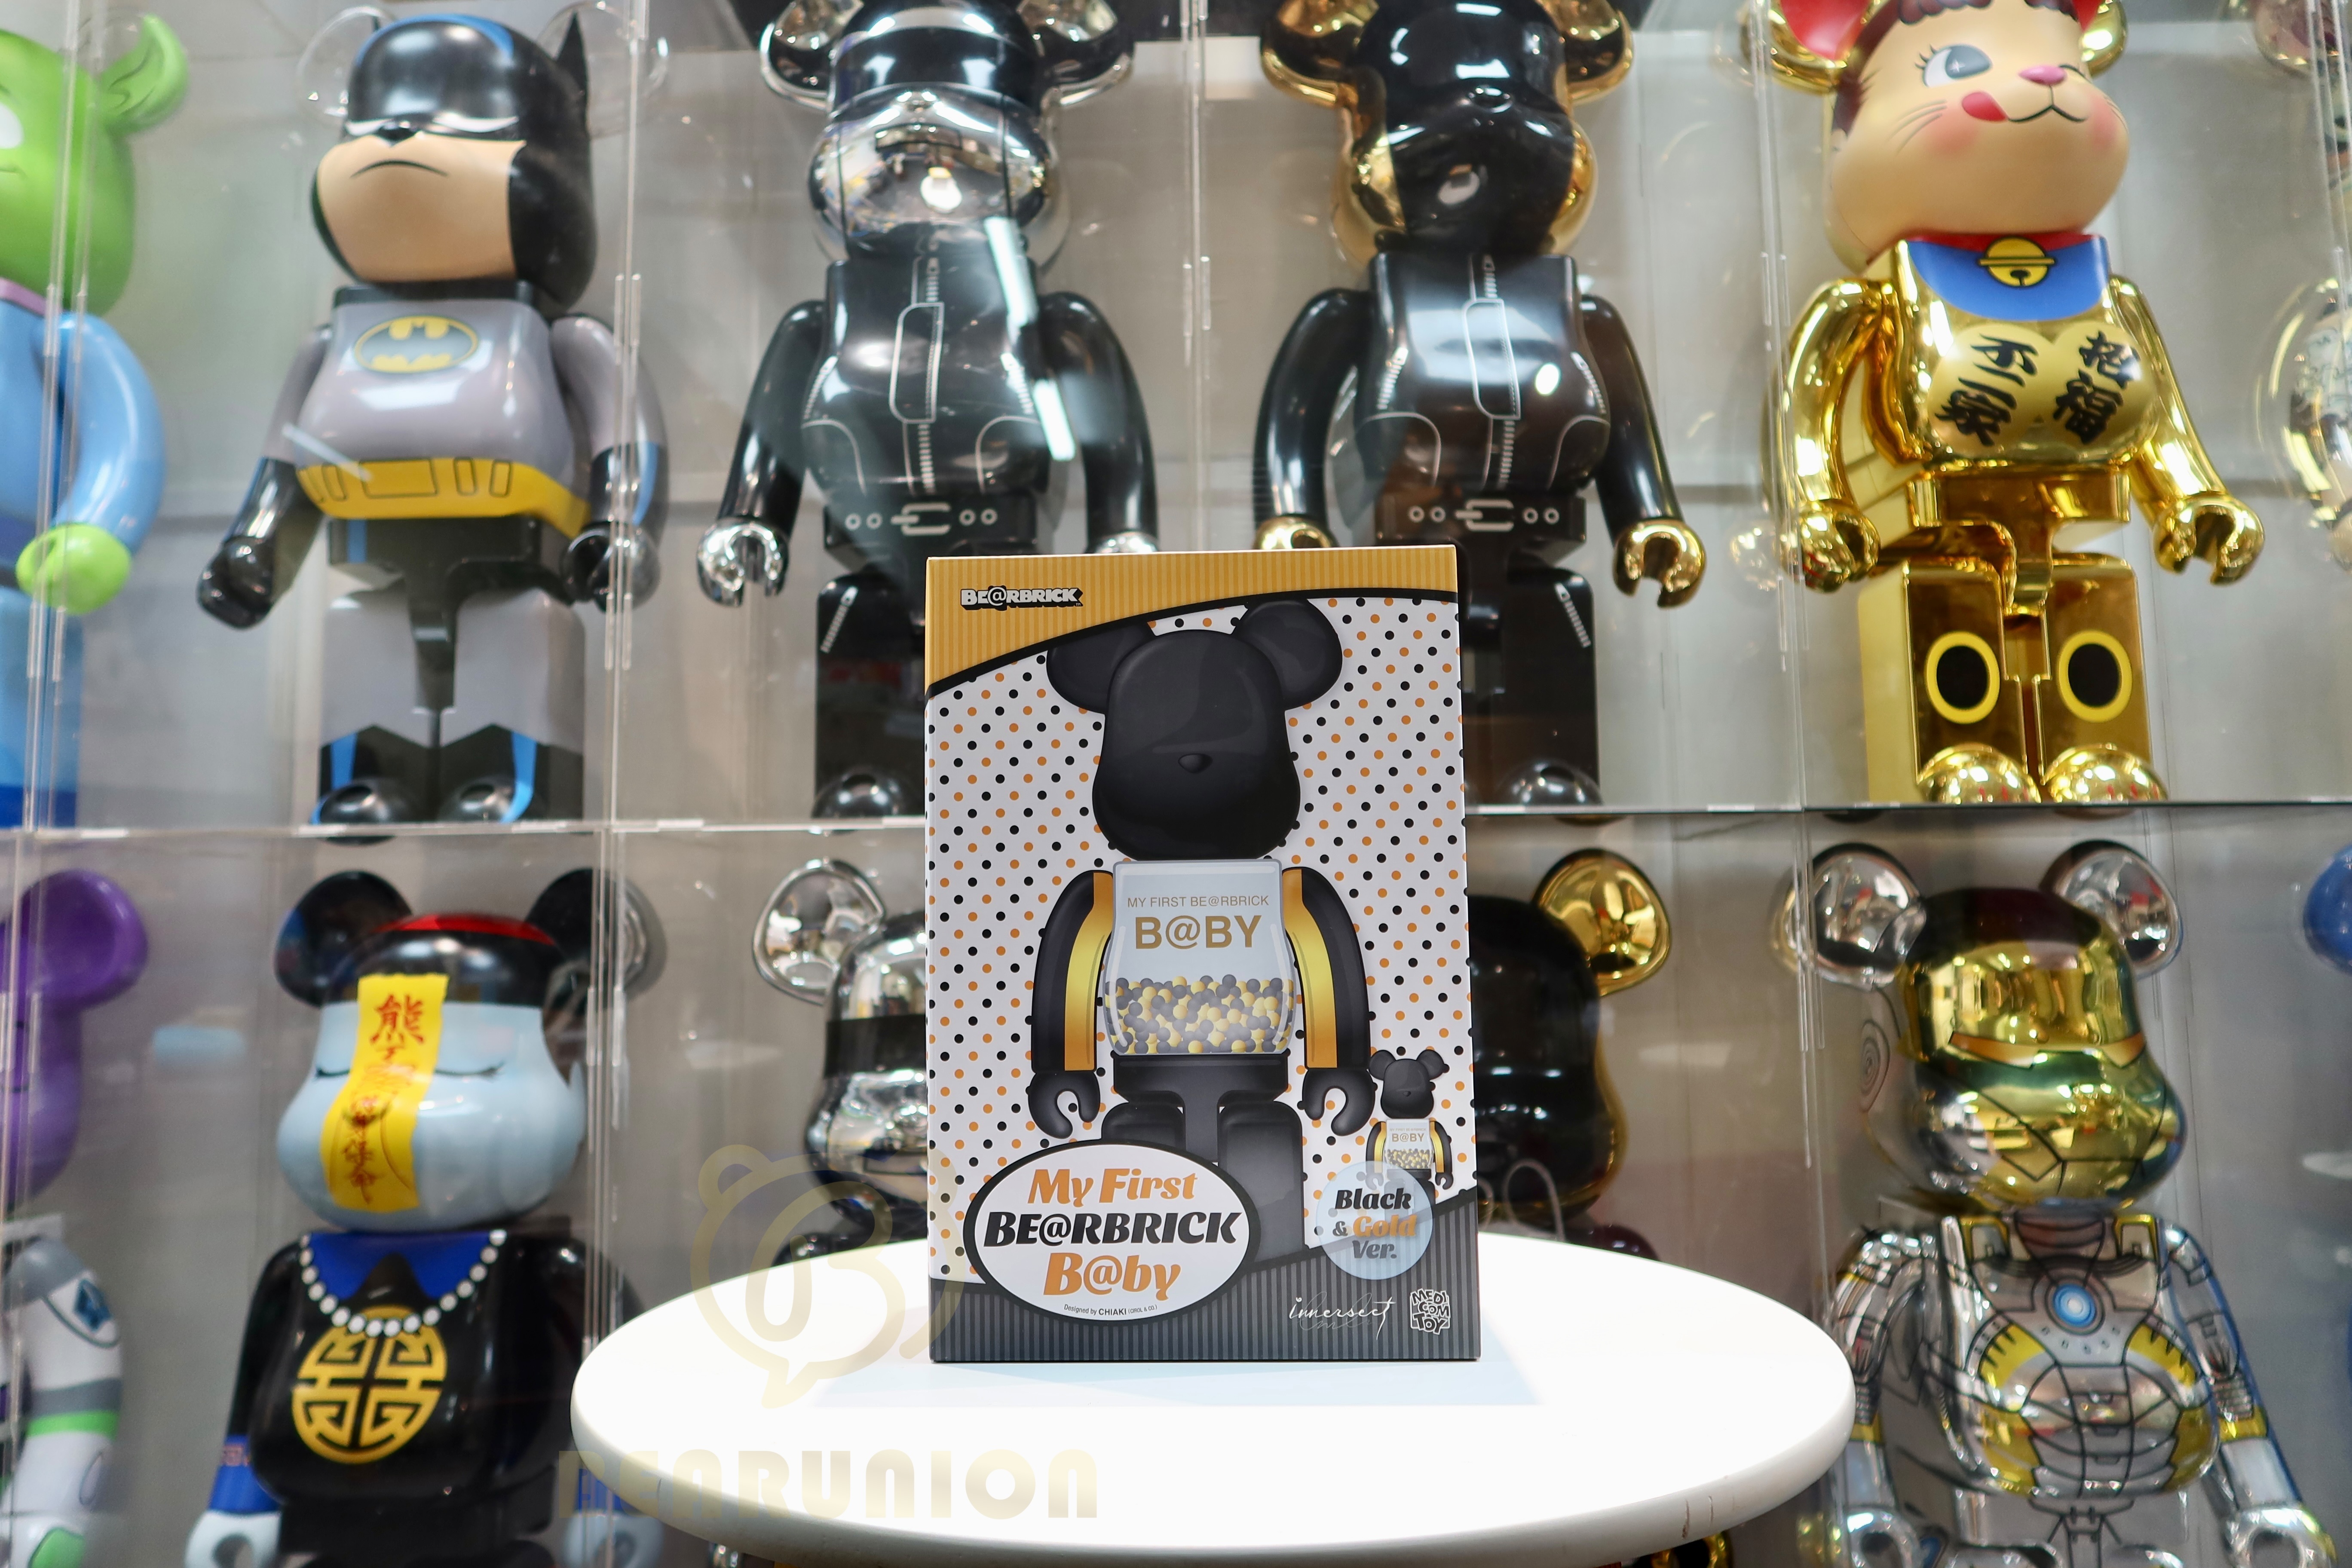 Bearbrick 400% 100% B@BY INNERSECT BLACK & GOLD